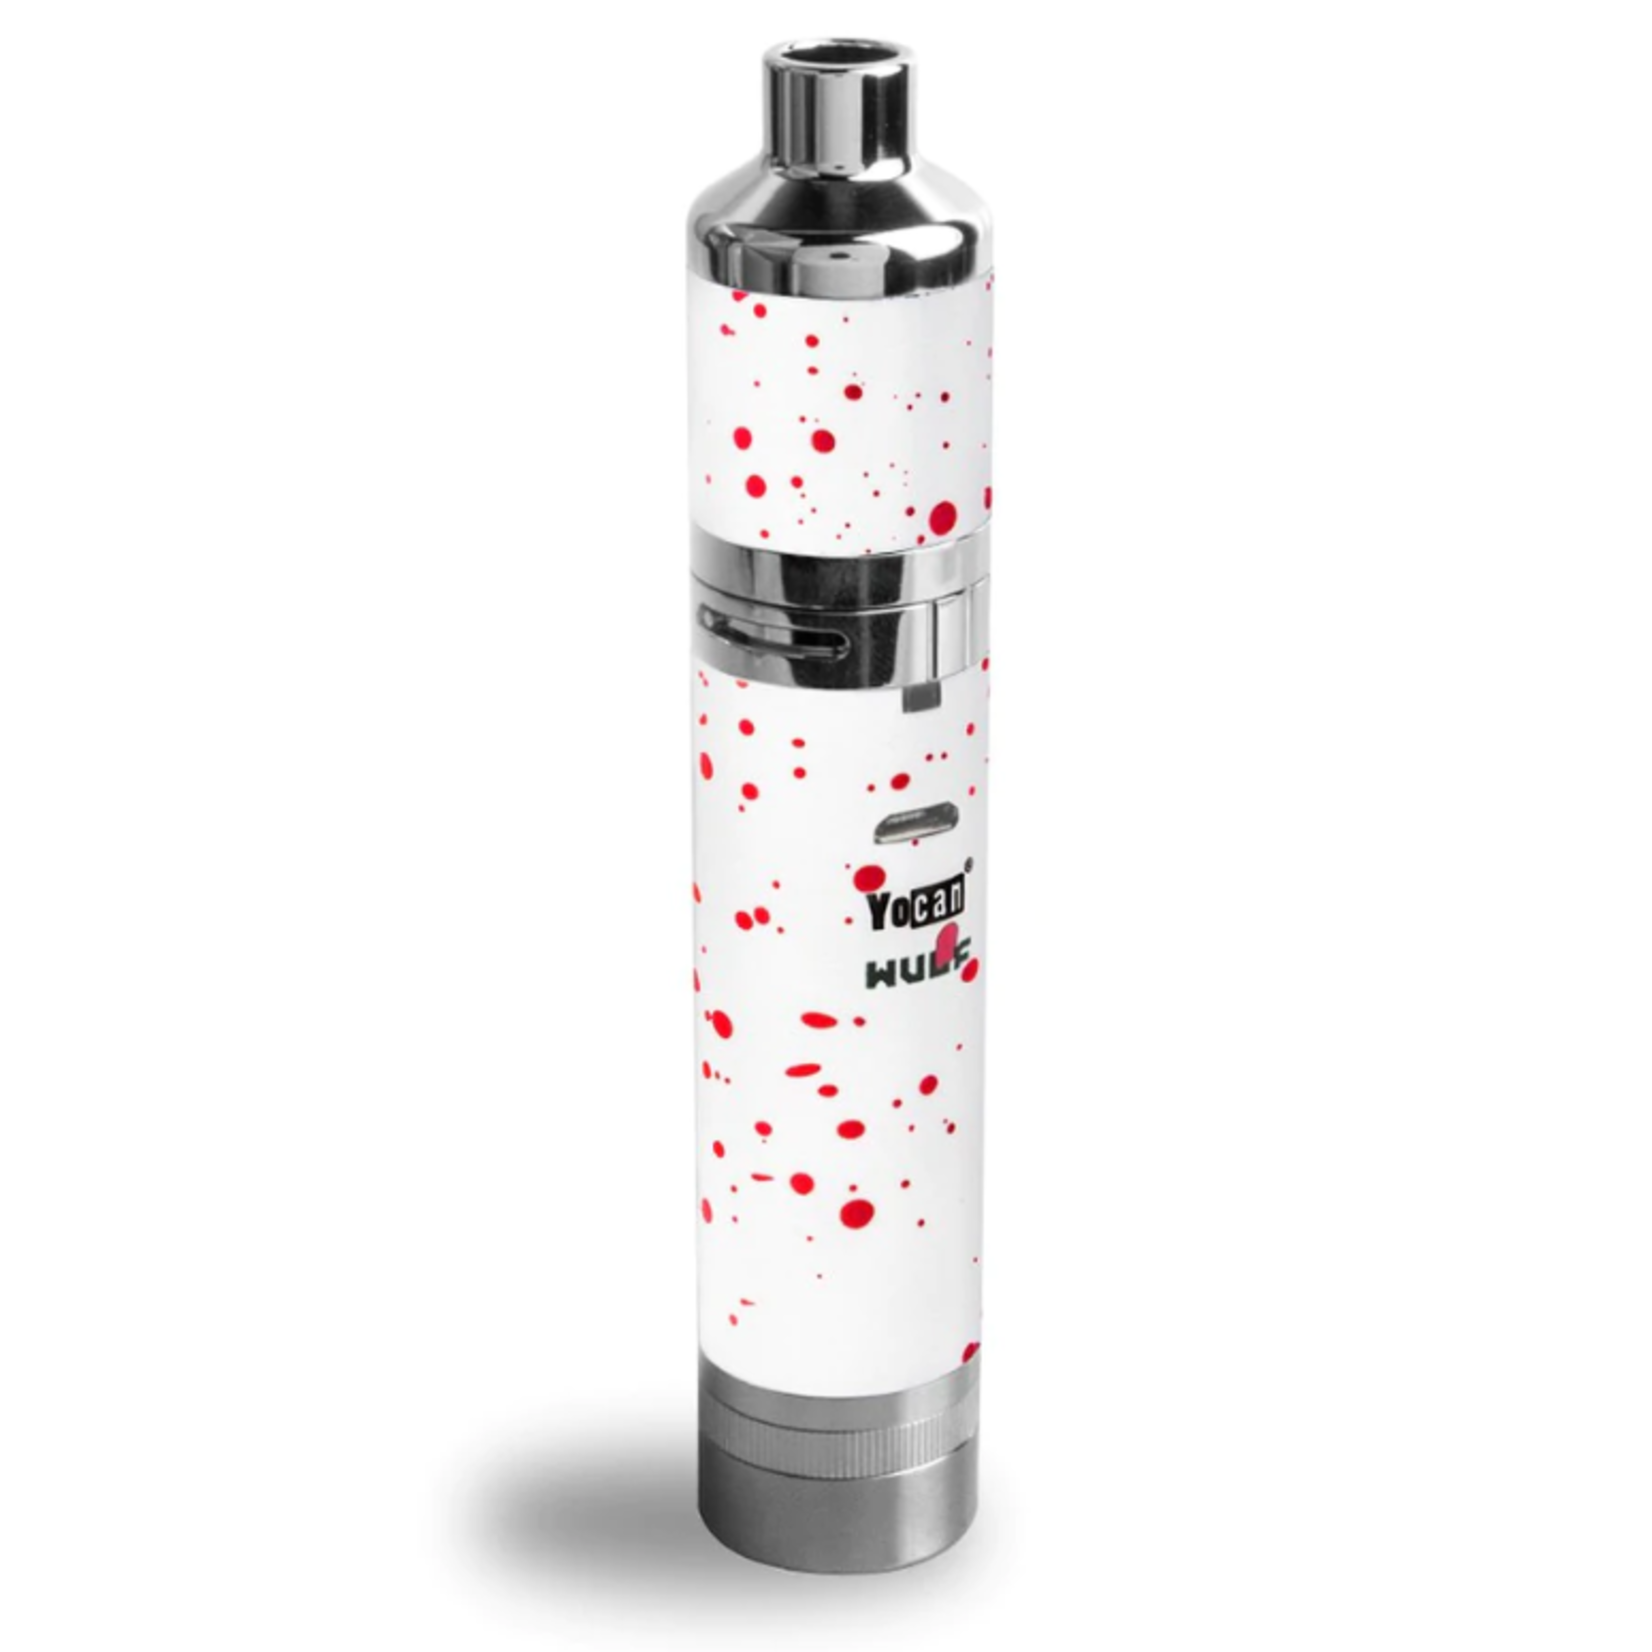 Yocan Yocan Evolve Plus XL (Wulf SE) Concentrate Vaporizer - White w/ Red Spatter